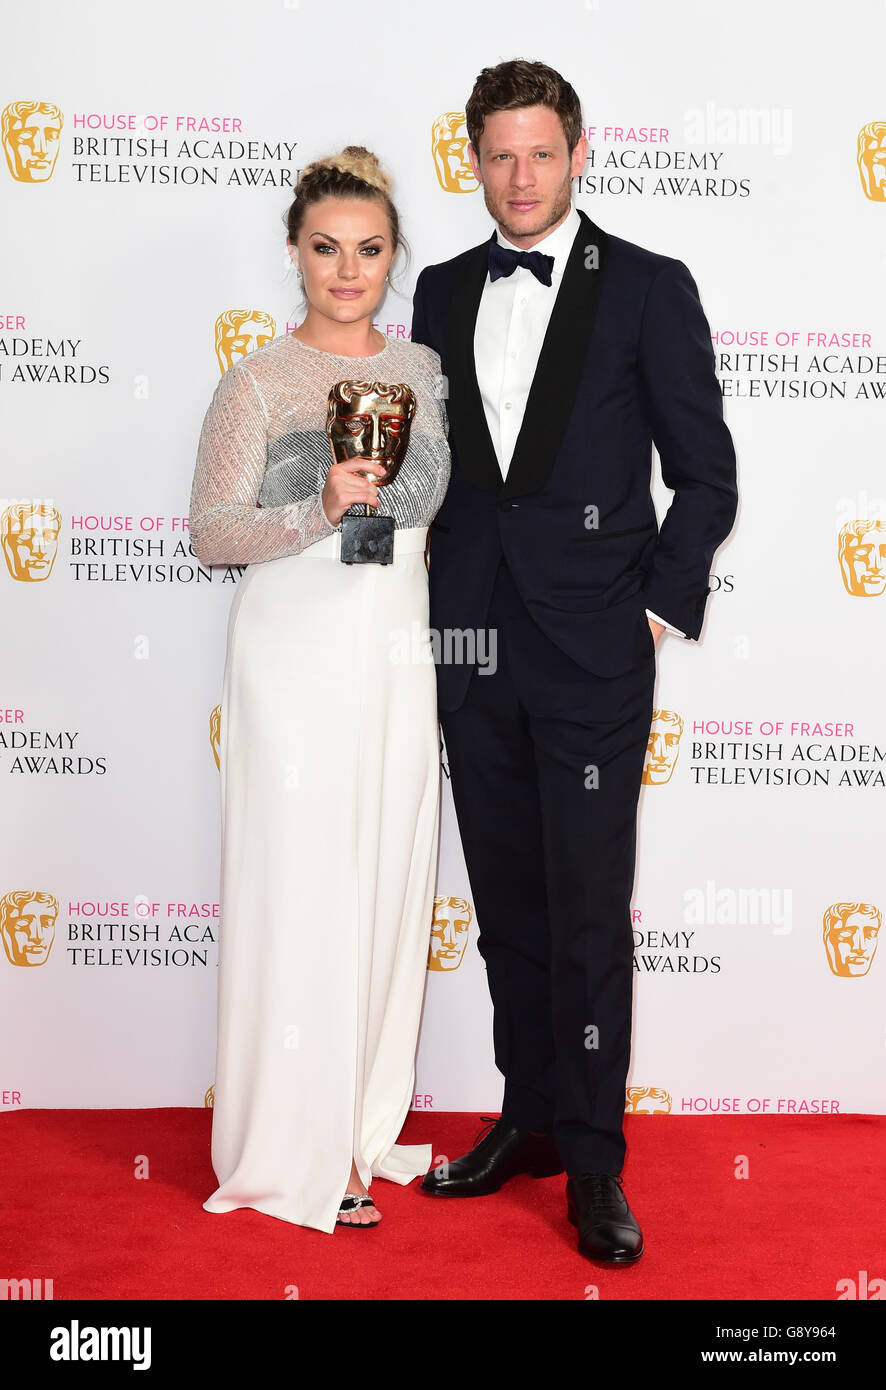 Chanel Cresswell with the award for best supporting actress and James Norton during the House of Fraser BAFTA TV Awards 2016 at the Royal Festival Hall, Southbank, London. Stock Photo